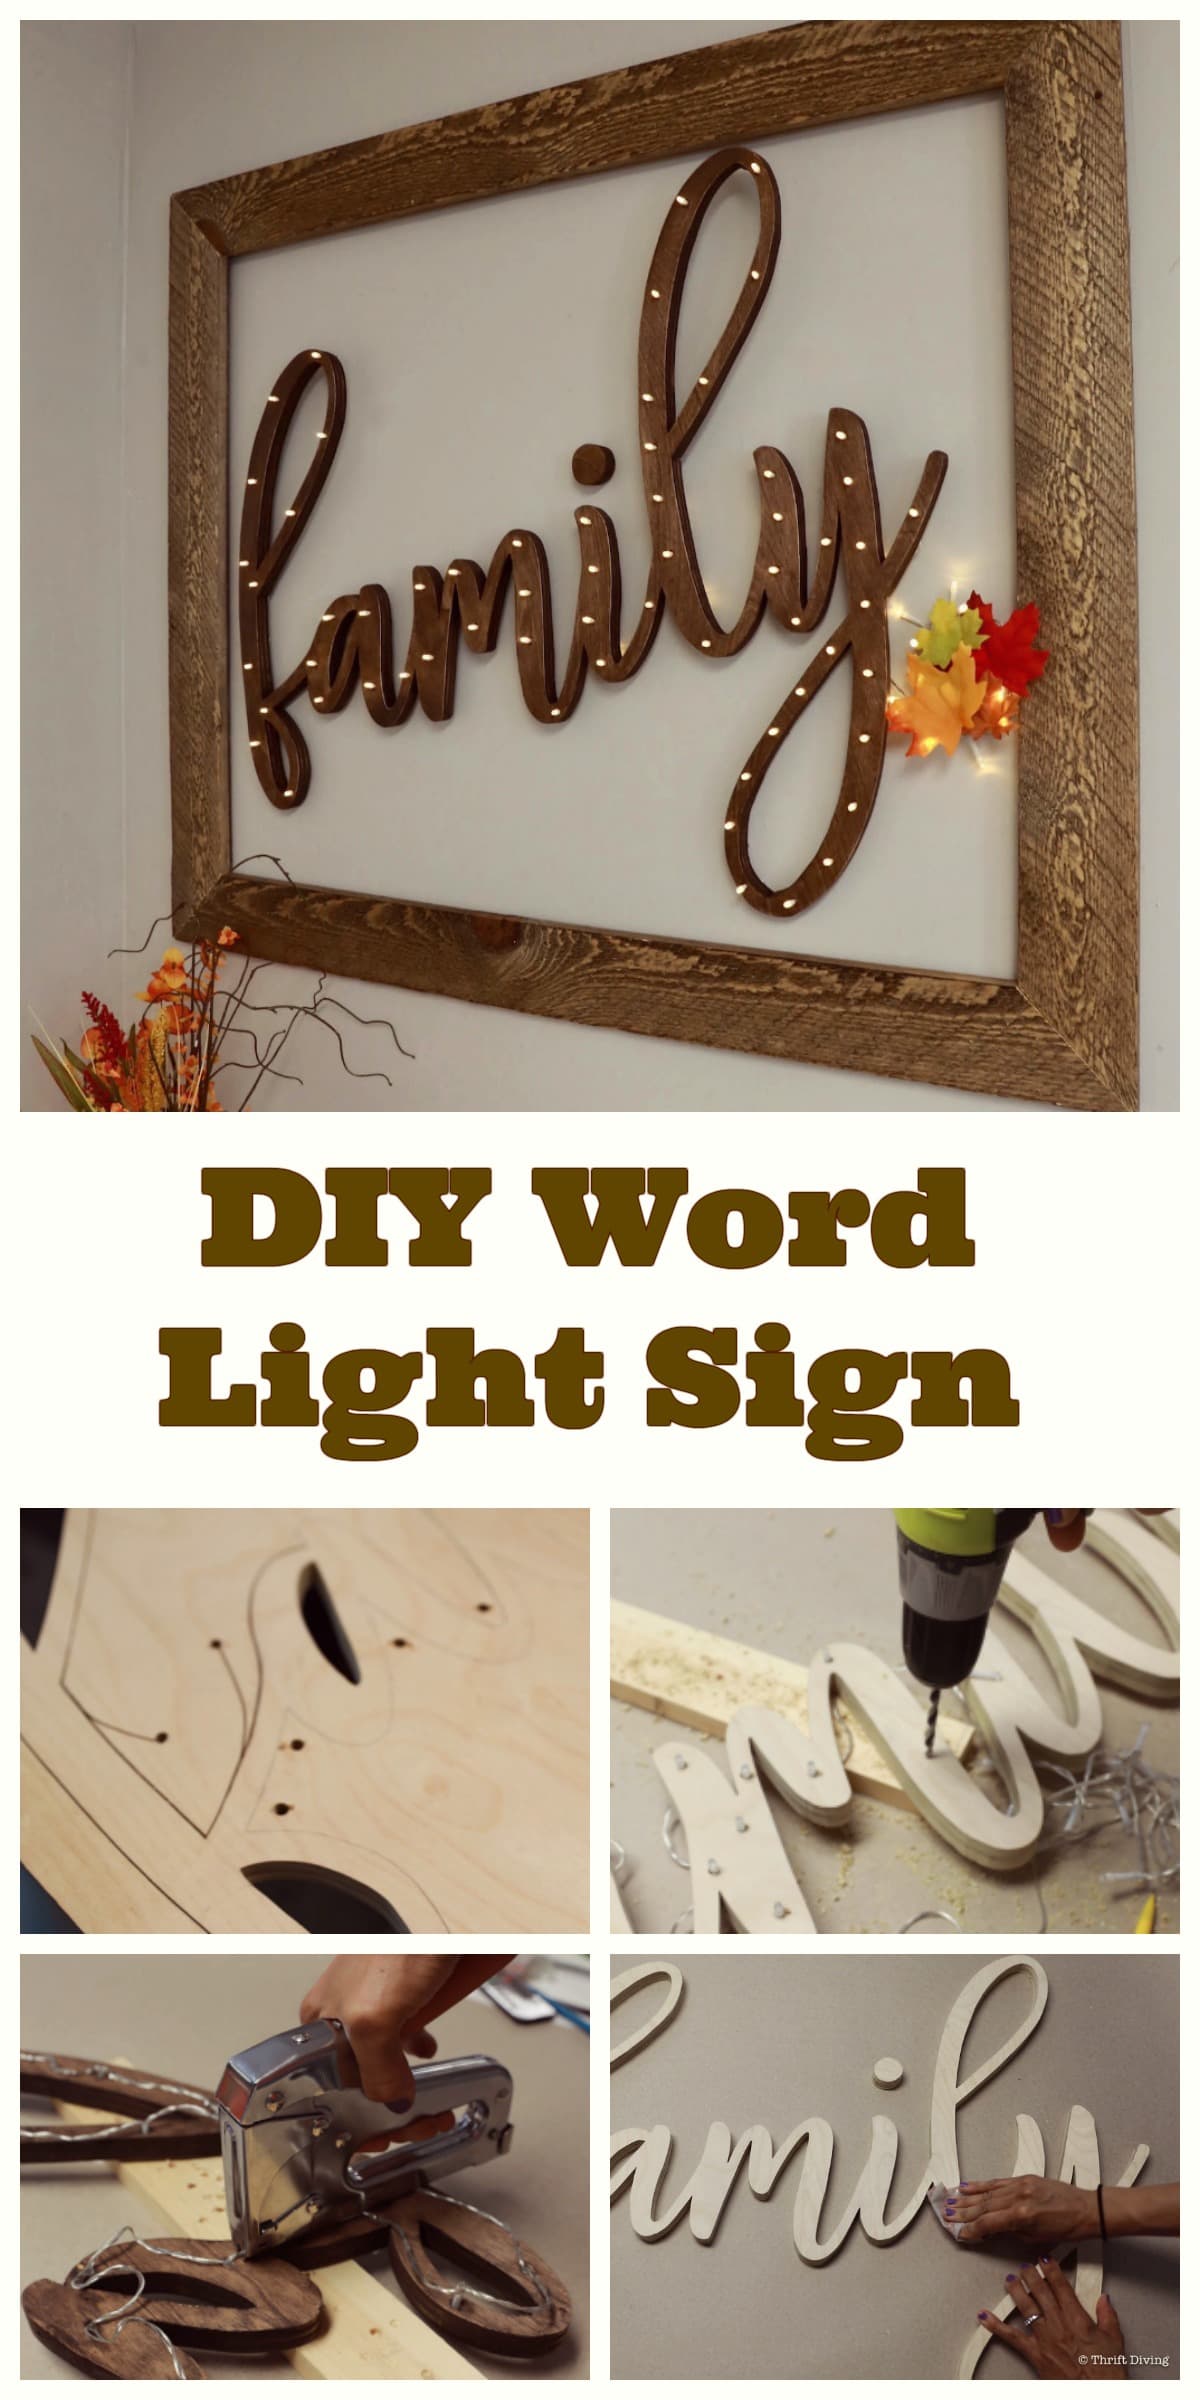 How to Make a DIY Word Light Sign From Wood - Thrift Diving